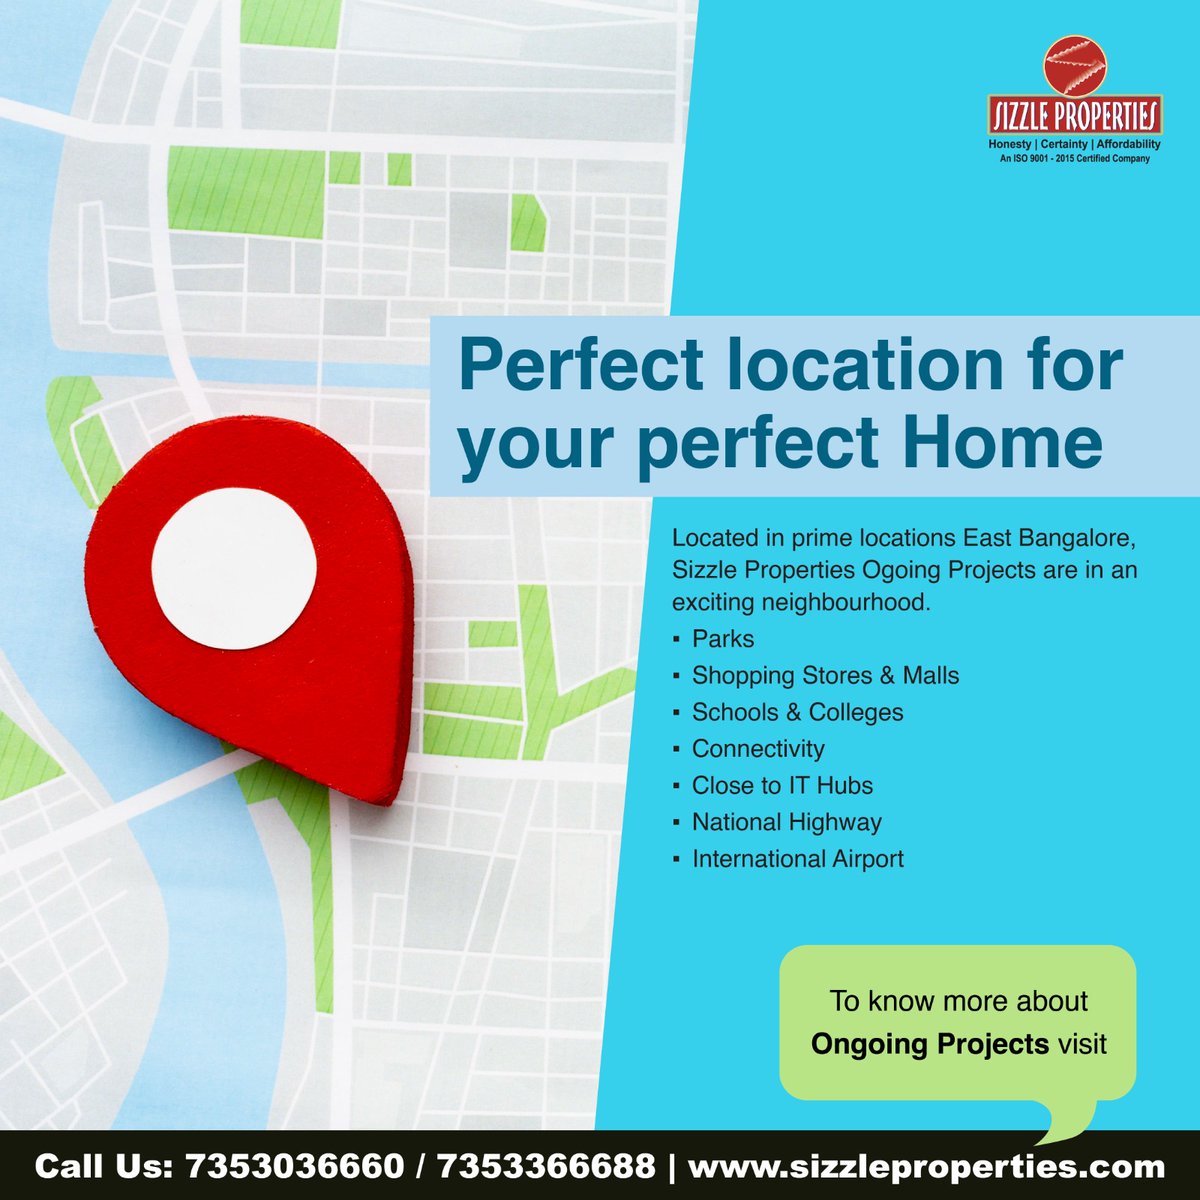 Located in prime locations East Bangalore, #SizzleProperties Ogoing Projects are in an exciting neighbourhood.

To know more about Ongoing Projects, Visit @ sizzleproperties.com/on-going-proje…

#Villaplotsbangalore #Residentialplotsbudigere #plotsinkrpuram #Residentialplotswhitefield